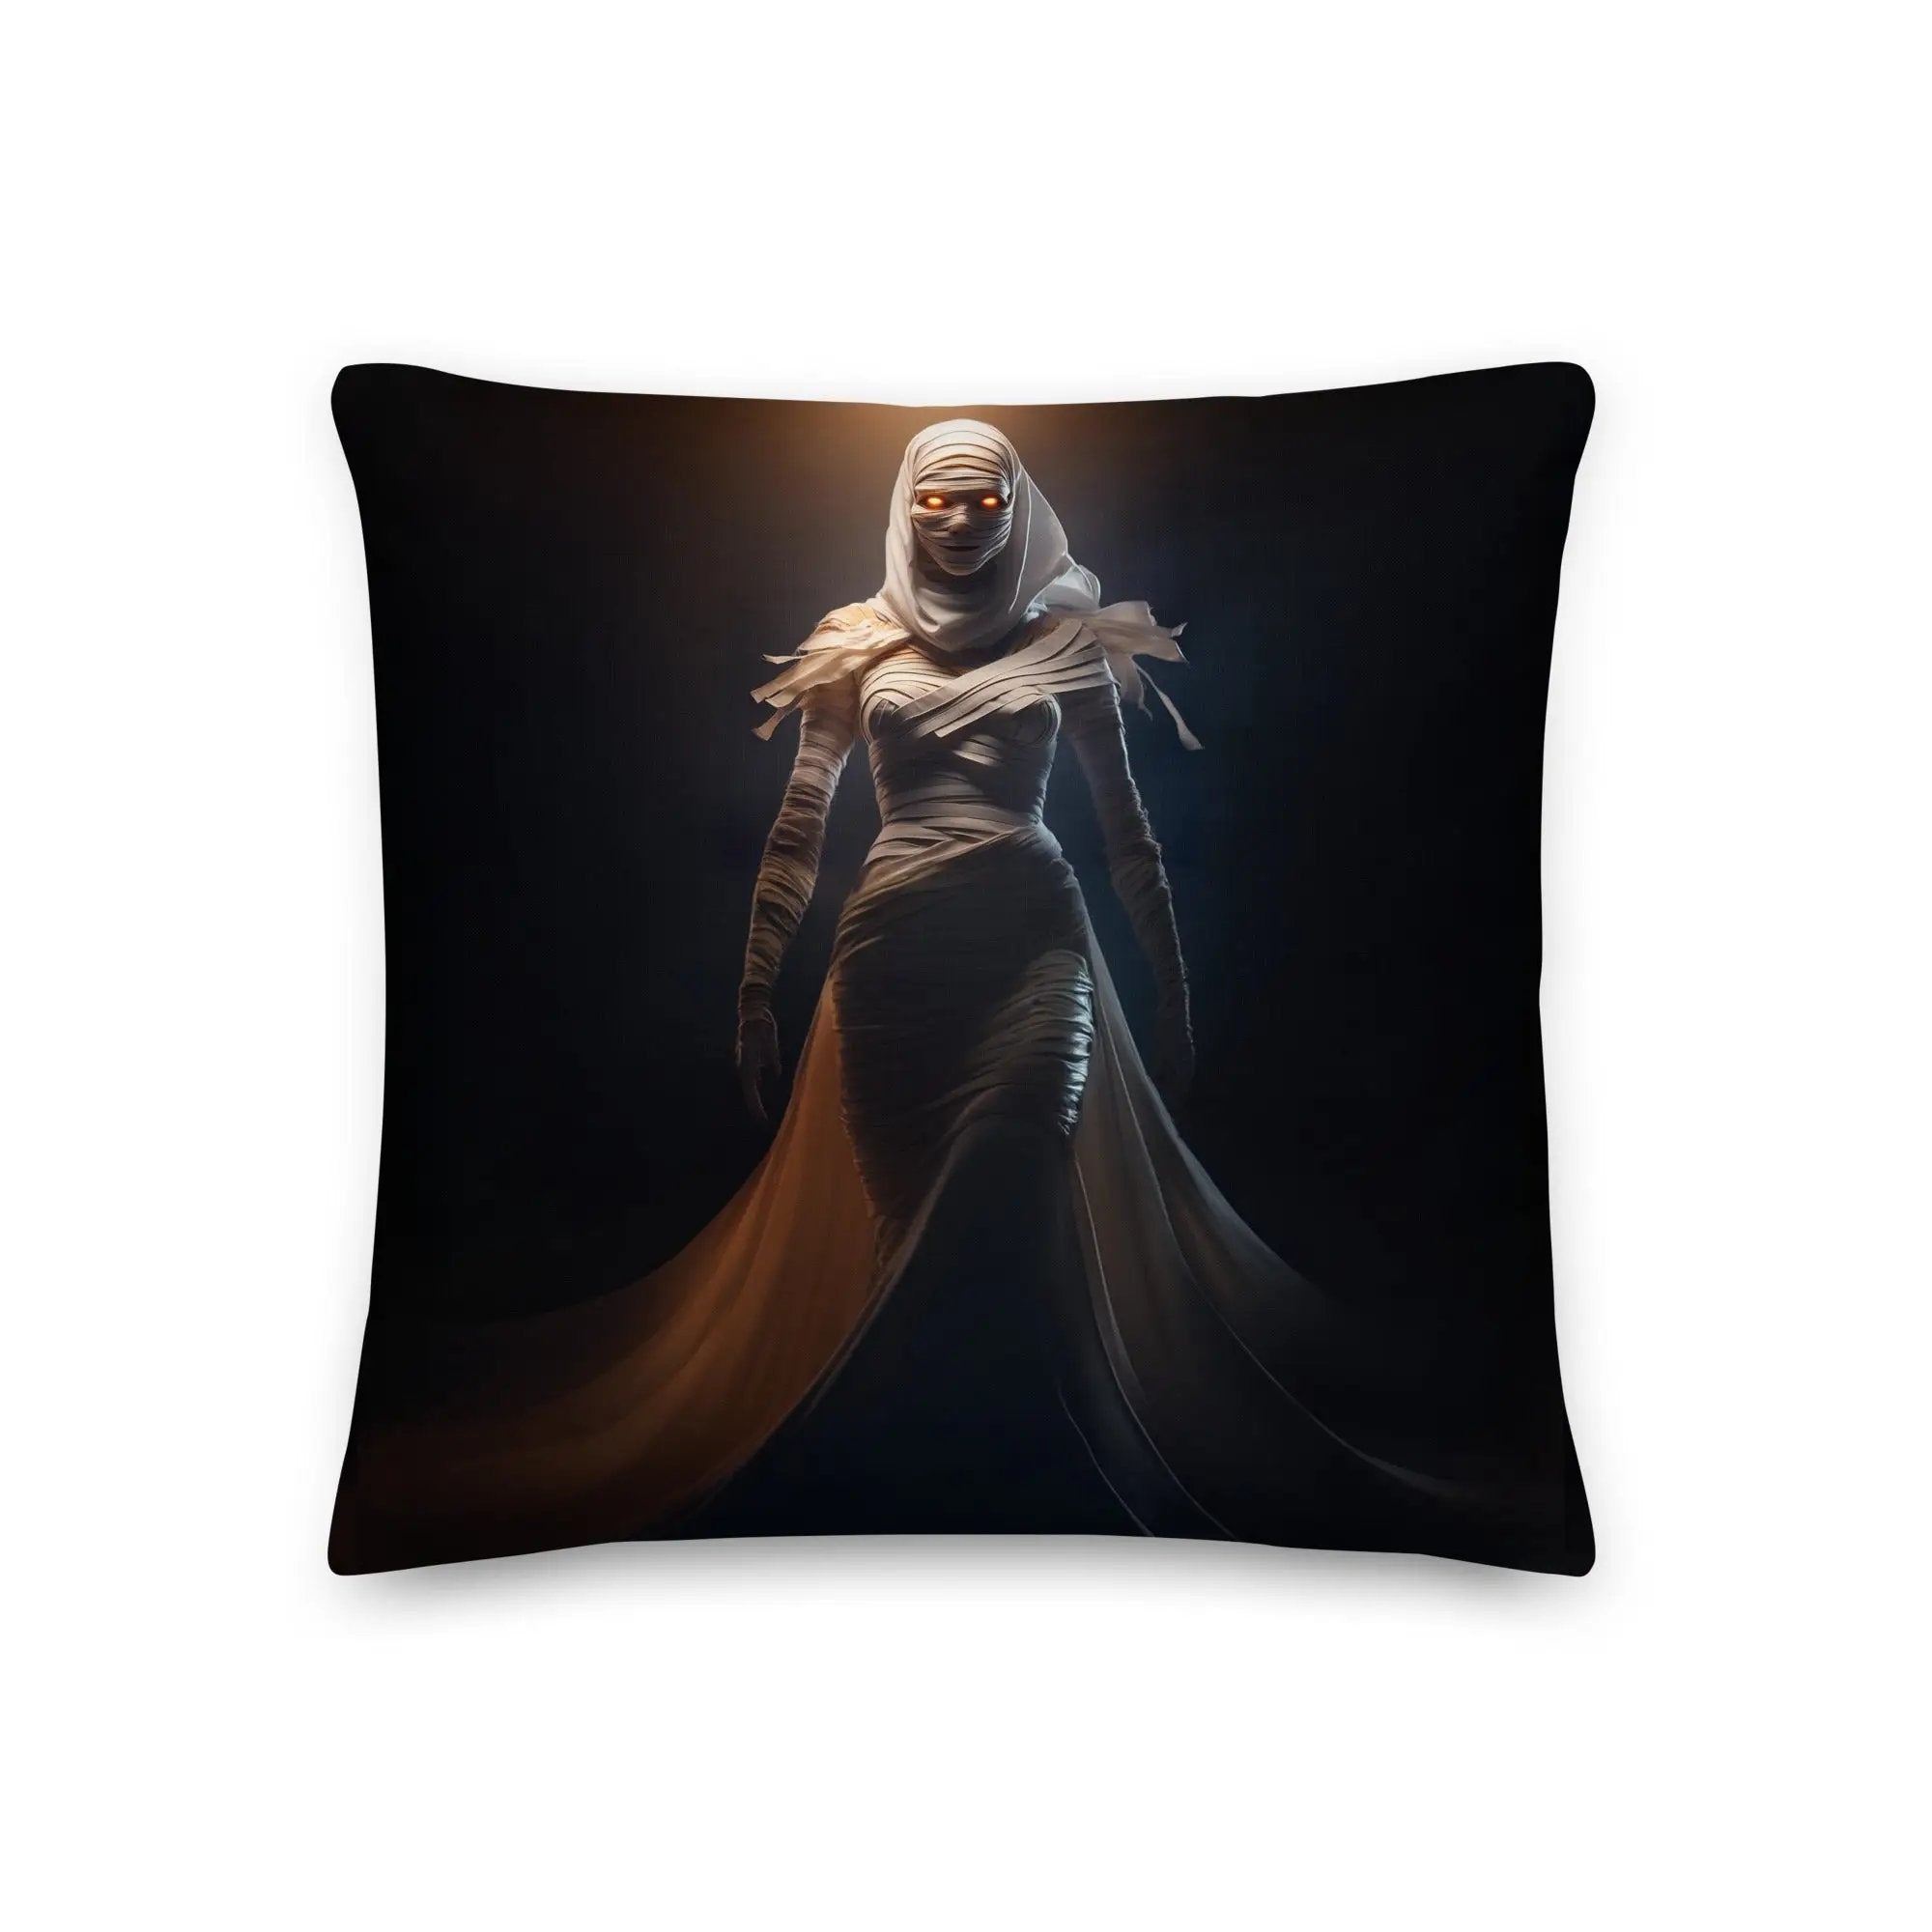 The Monster Squad "The Mummy" Premium Pillow